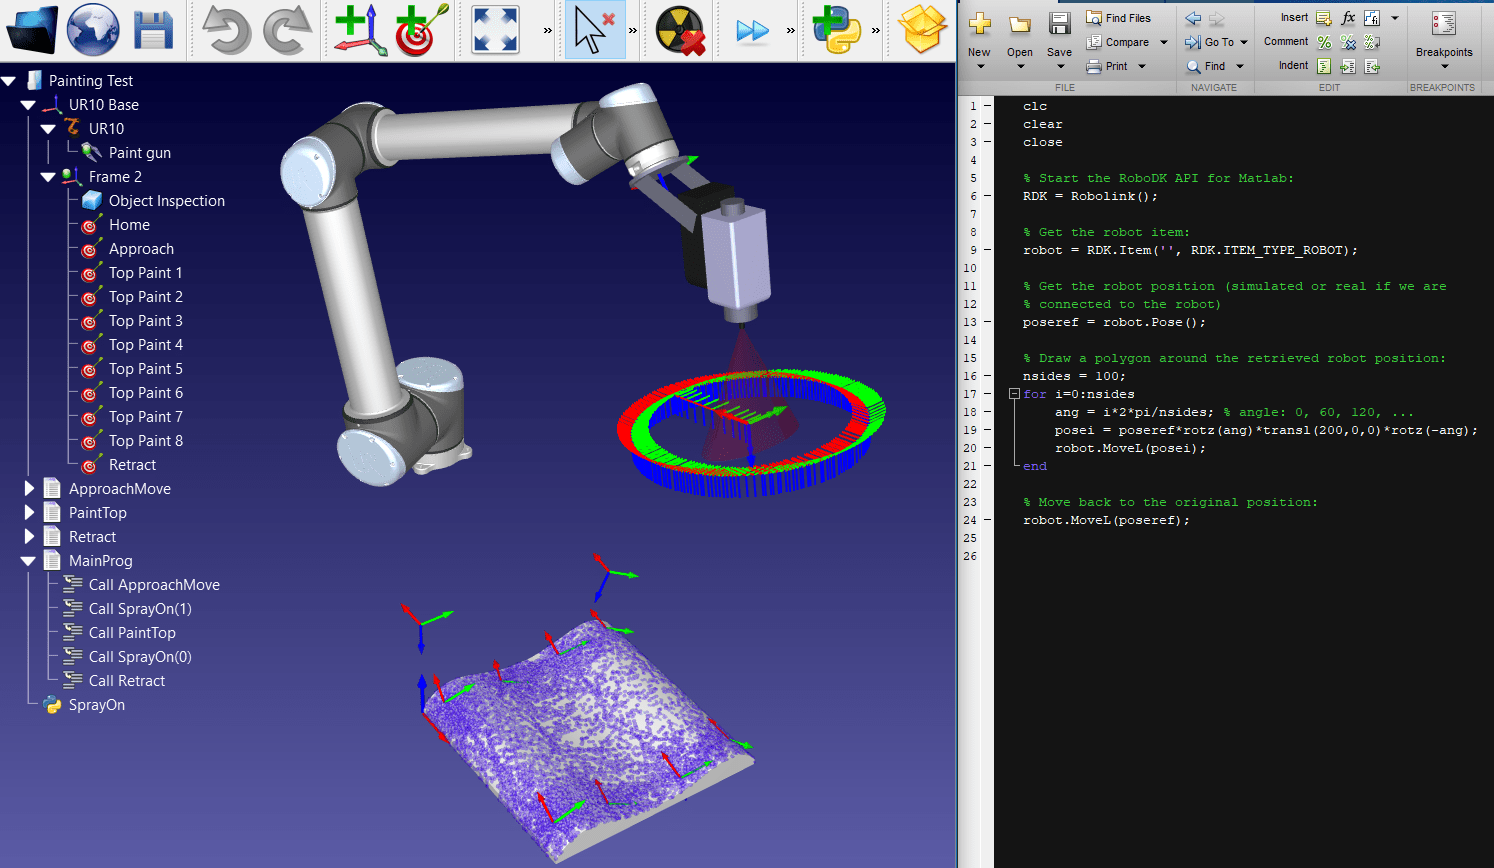 RoboDK | software for collaborative robot automation